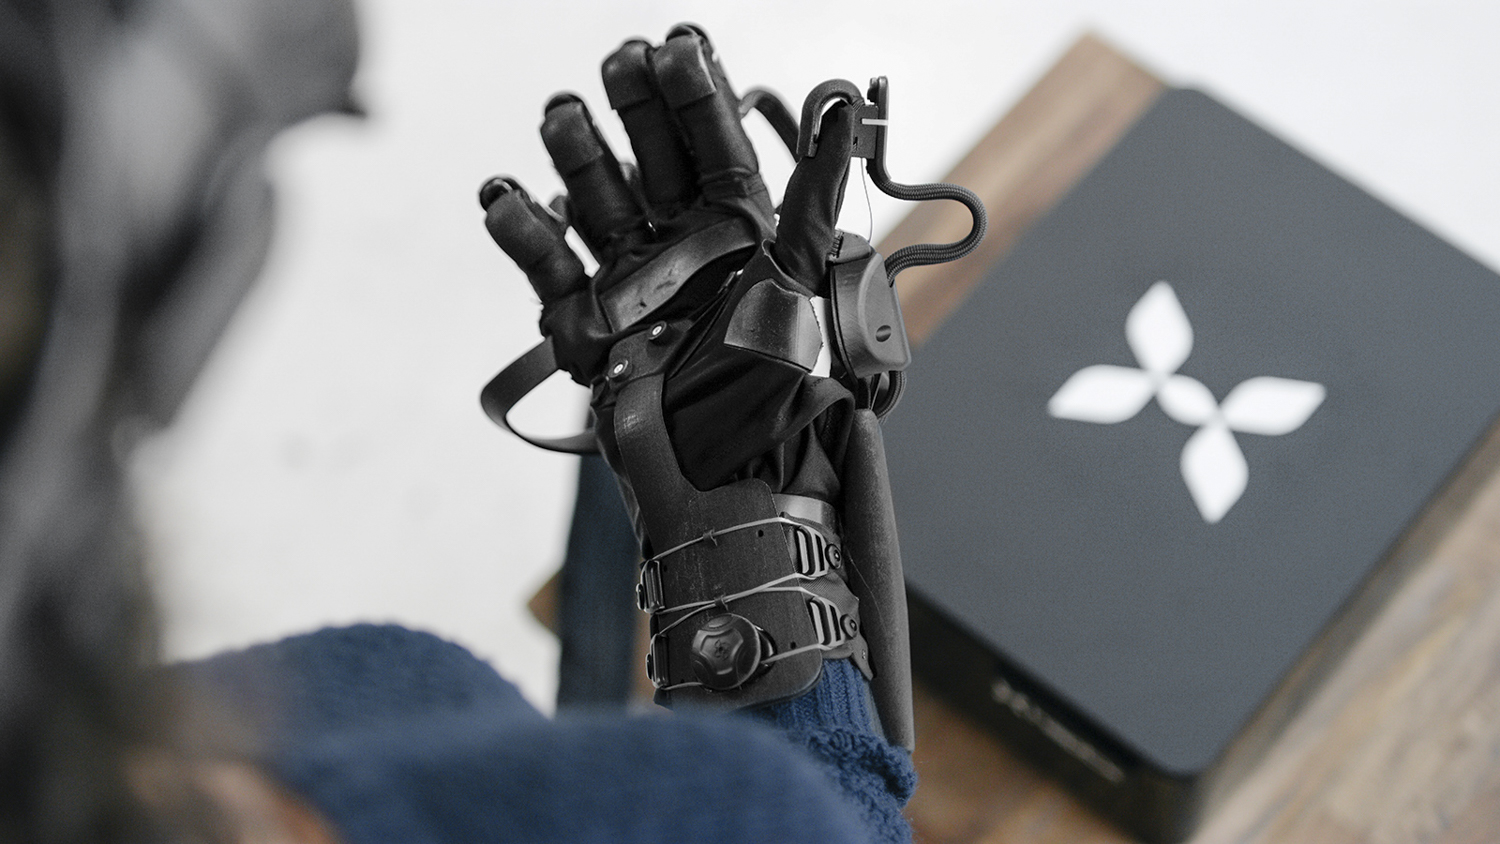 accessories that could make reality even immersive | Digital Trends